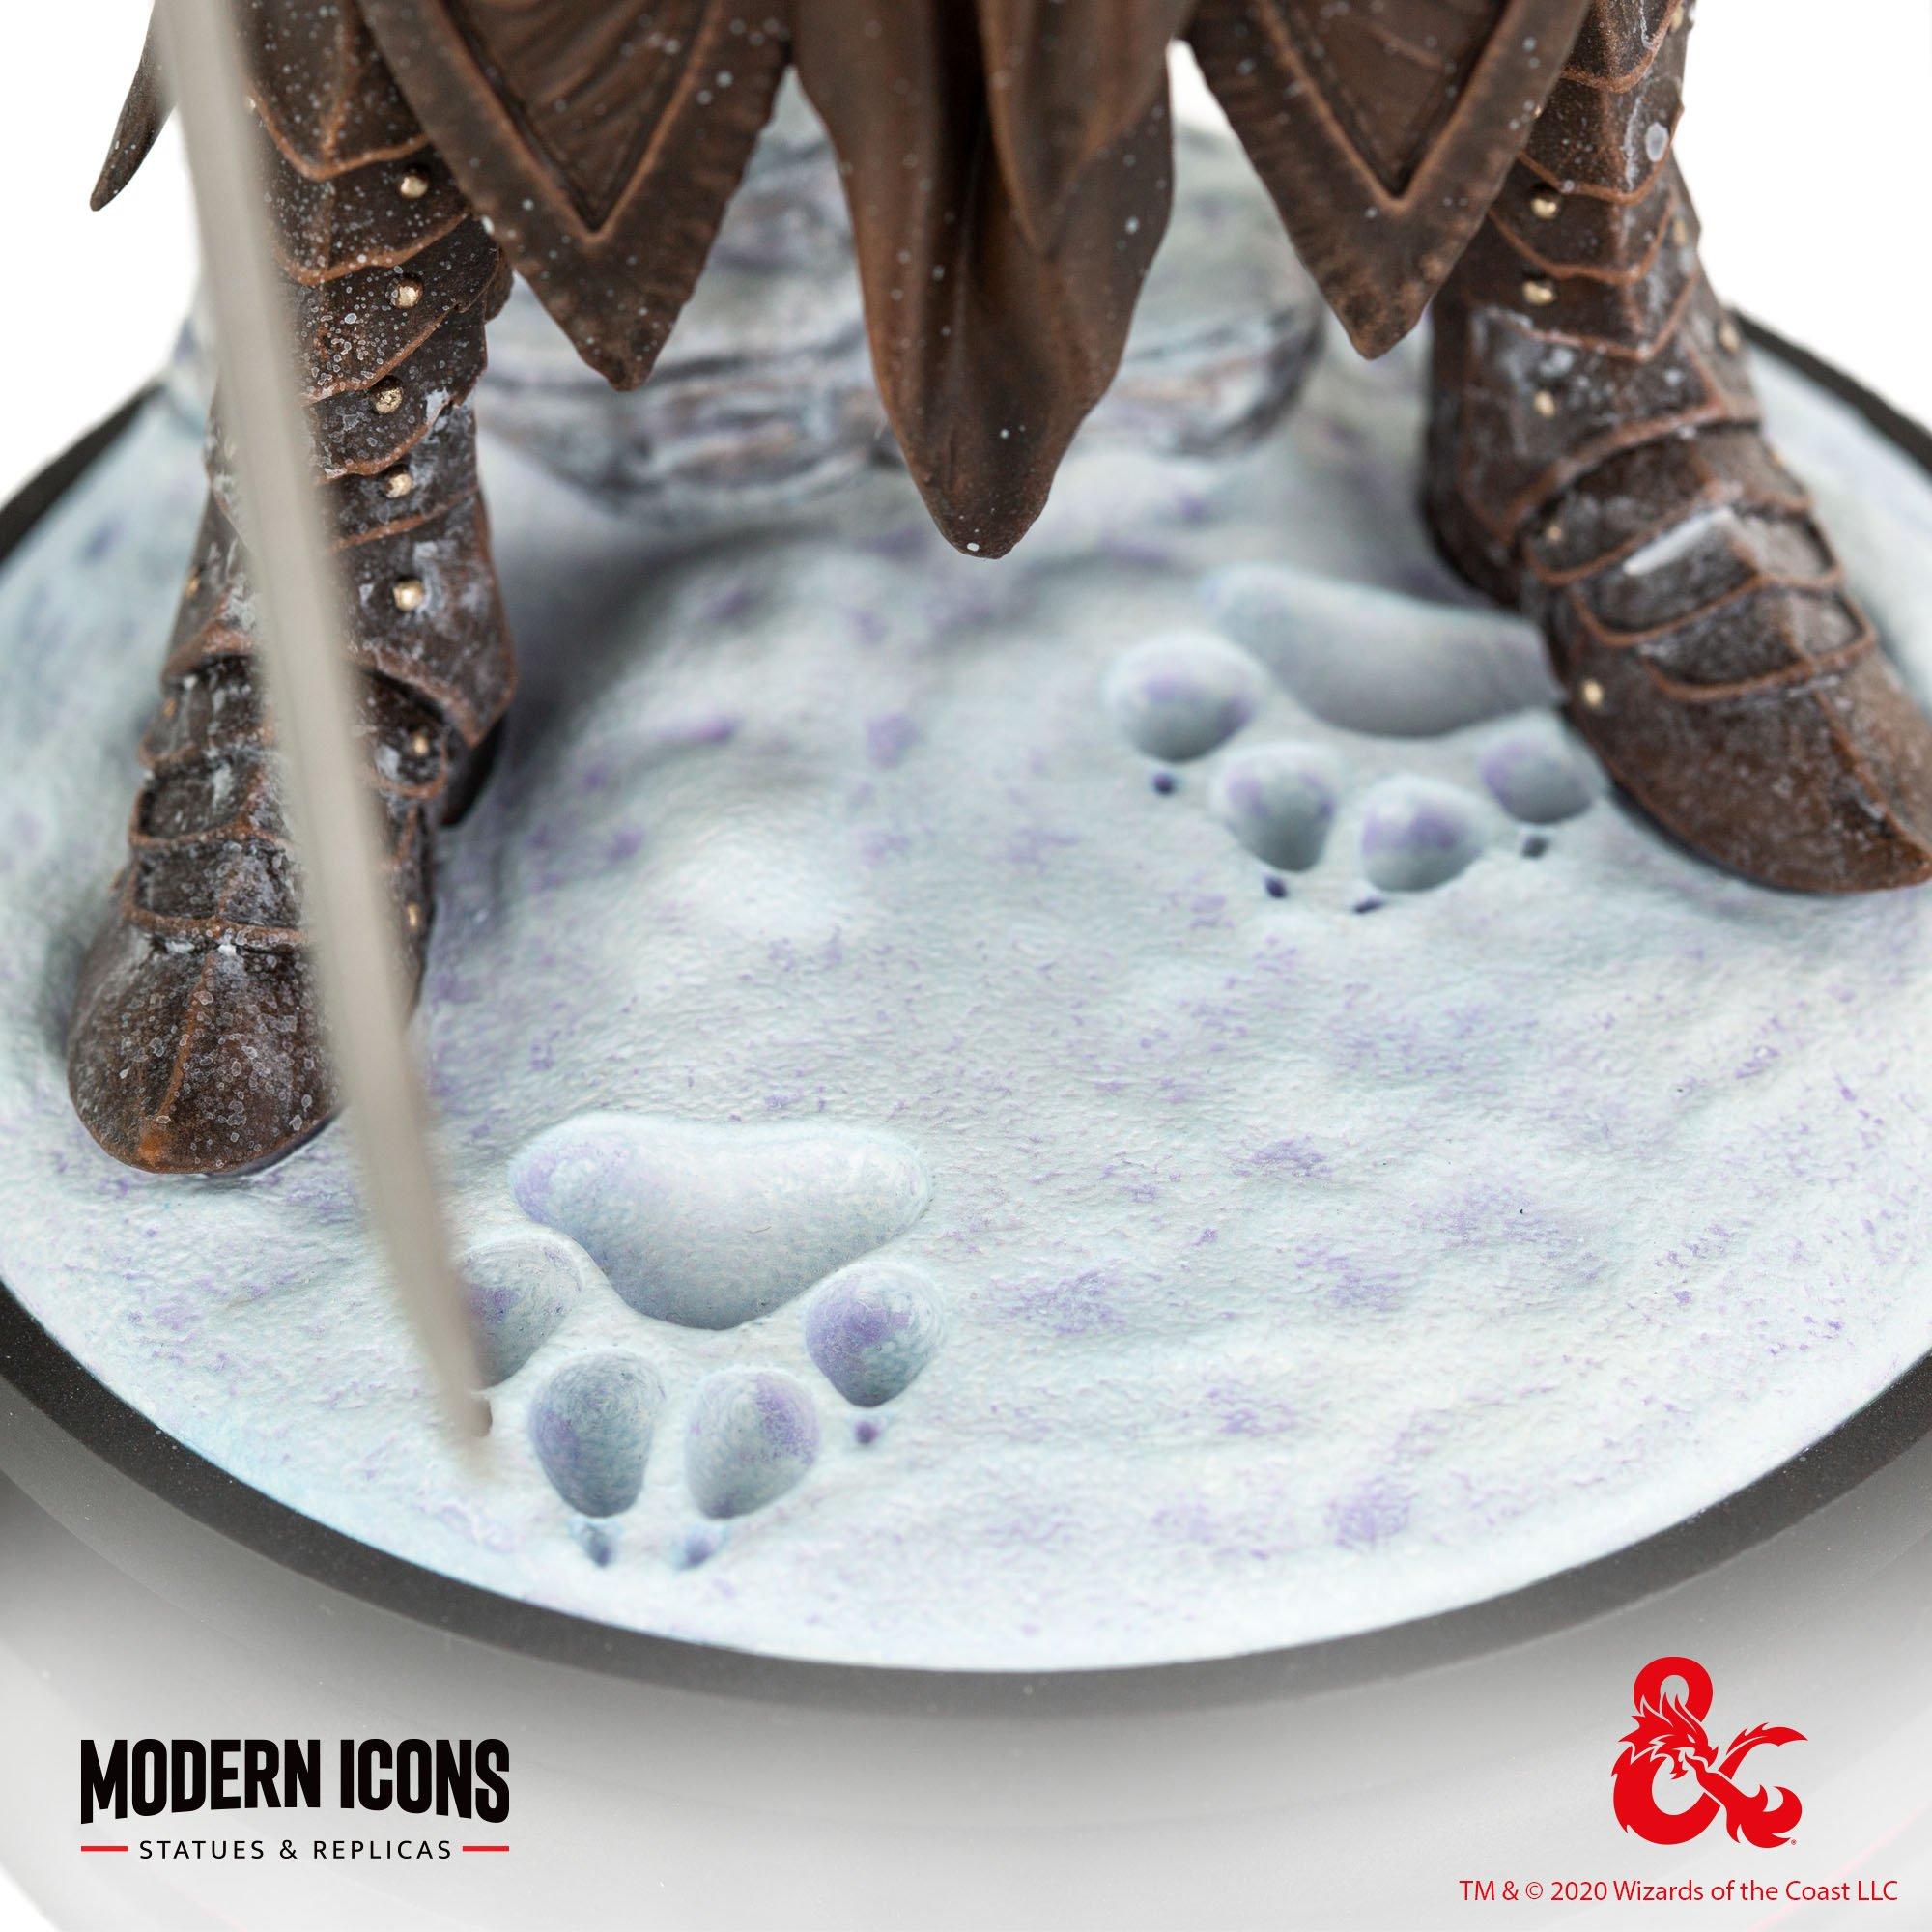 Modern Icons Dungeons and Dragons Drizzt Do'Urden Modern Icons Statue GameStop Exclusive